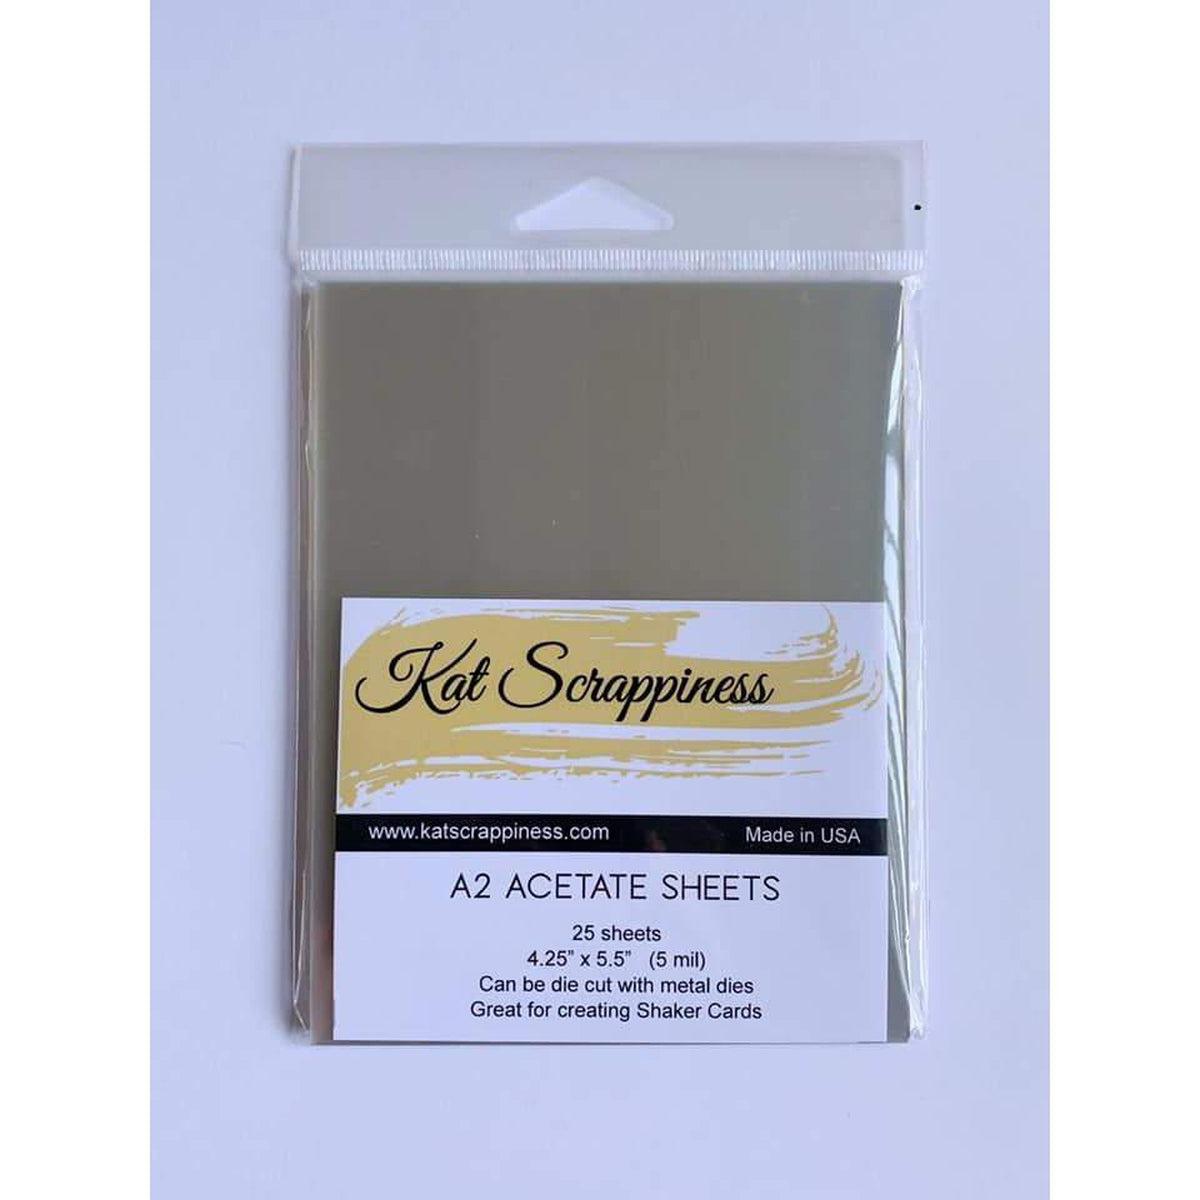 A2 Acetate sheets by Kat Scrappiness - 25pc - Kat Scrappiness